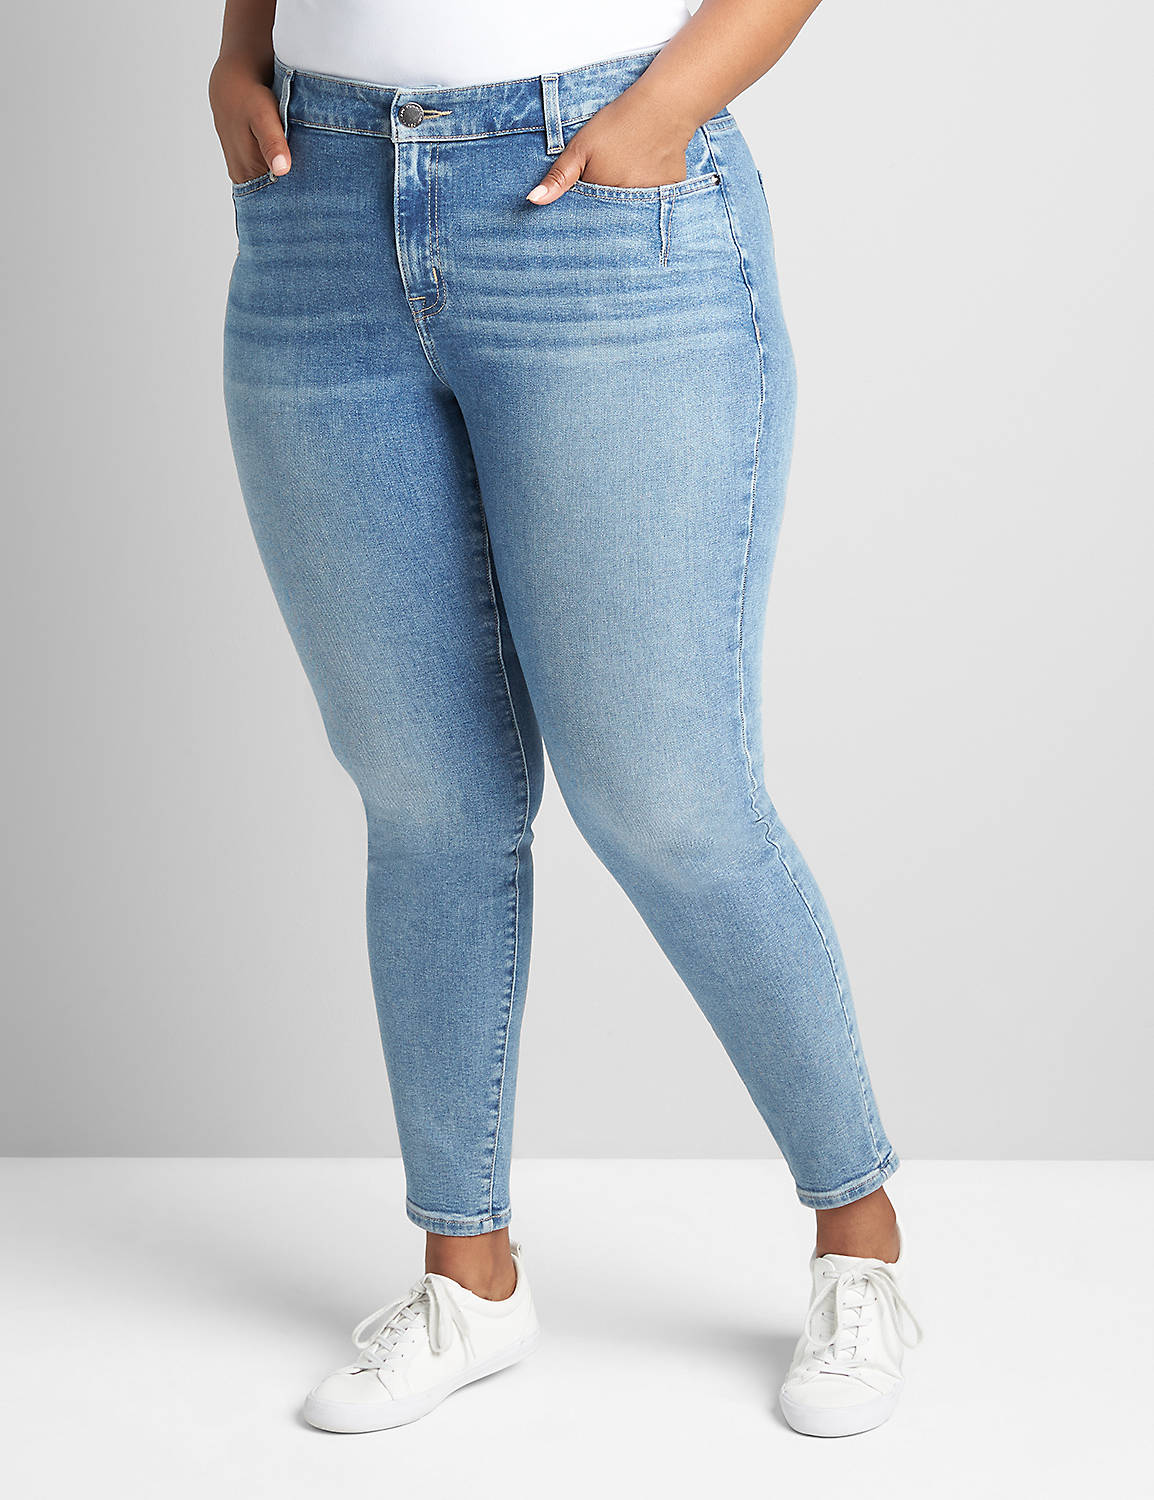 Curvy Fit High-Rise Skinny Jean- Light Wash Product Image 1